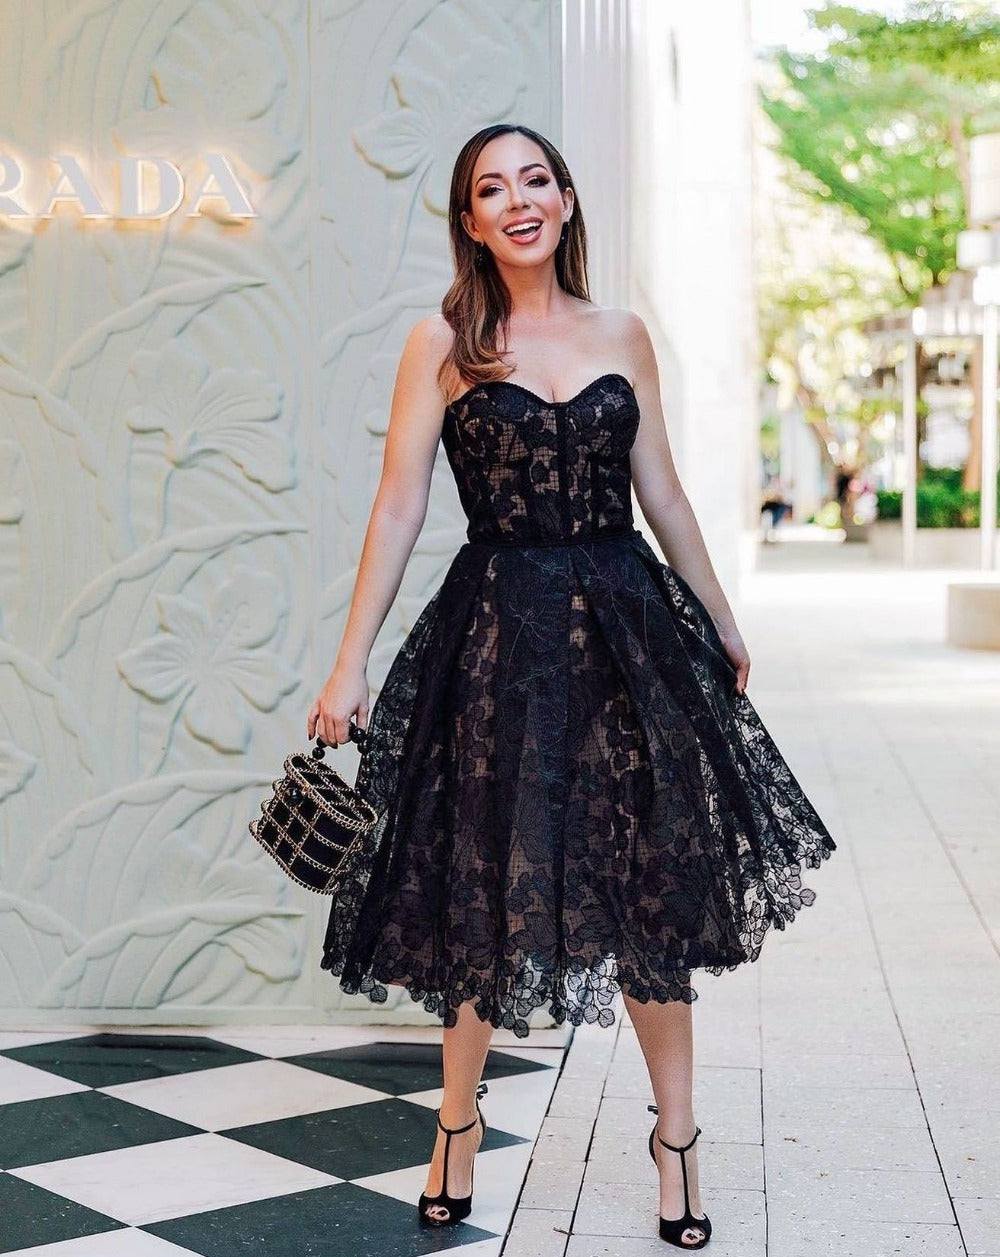 Everyday.Discount buy formal women knee lenght floral see through dresses instagram bridal weddings dresses pinterest lace bust insert fashionable summerdress tiktok videos partydress facebookwomen nightout fashiondress partydress see through offshoulder sleeveless satin lace coctaildress parties summer dresses women's coctail bridewear 